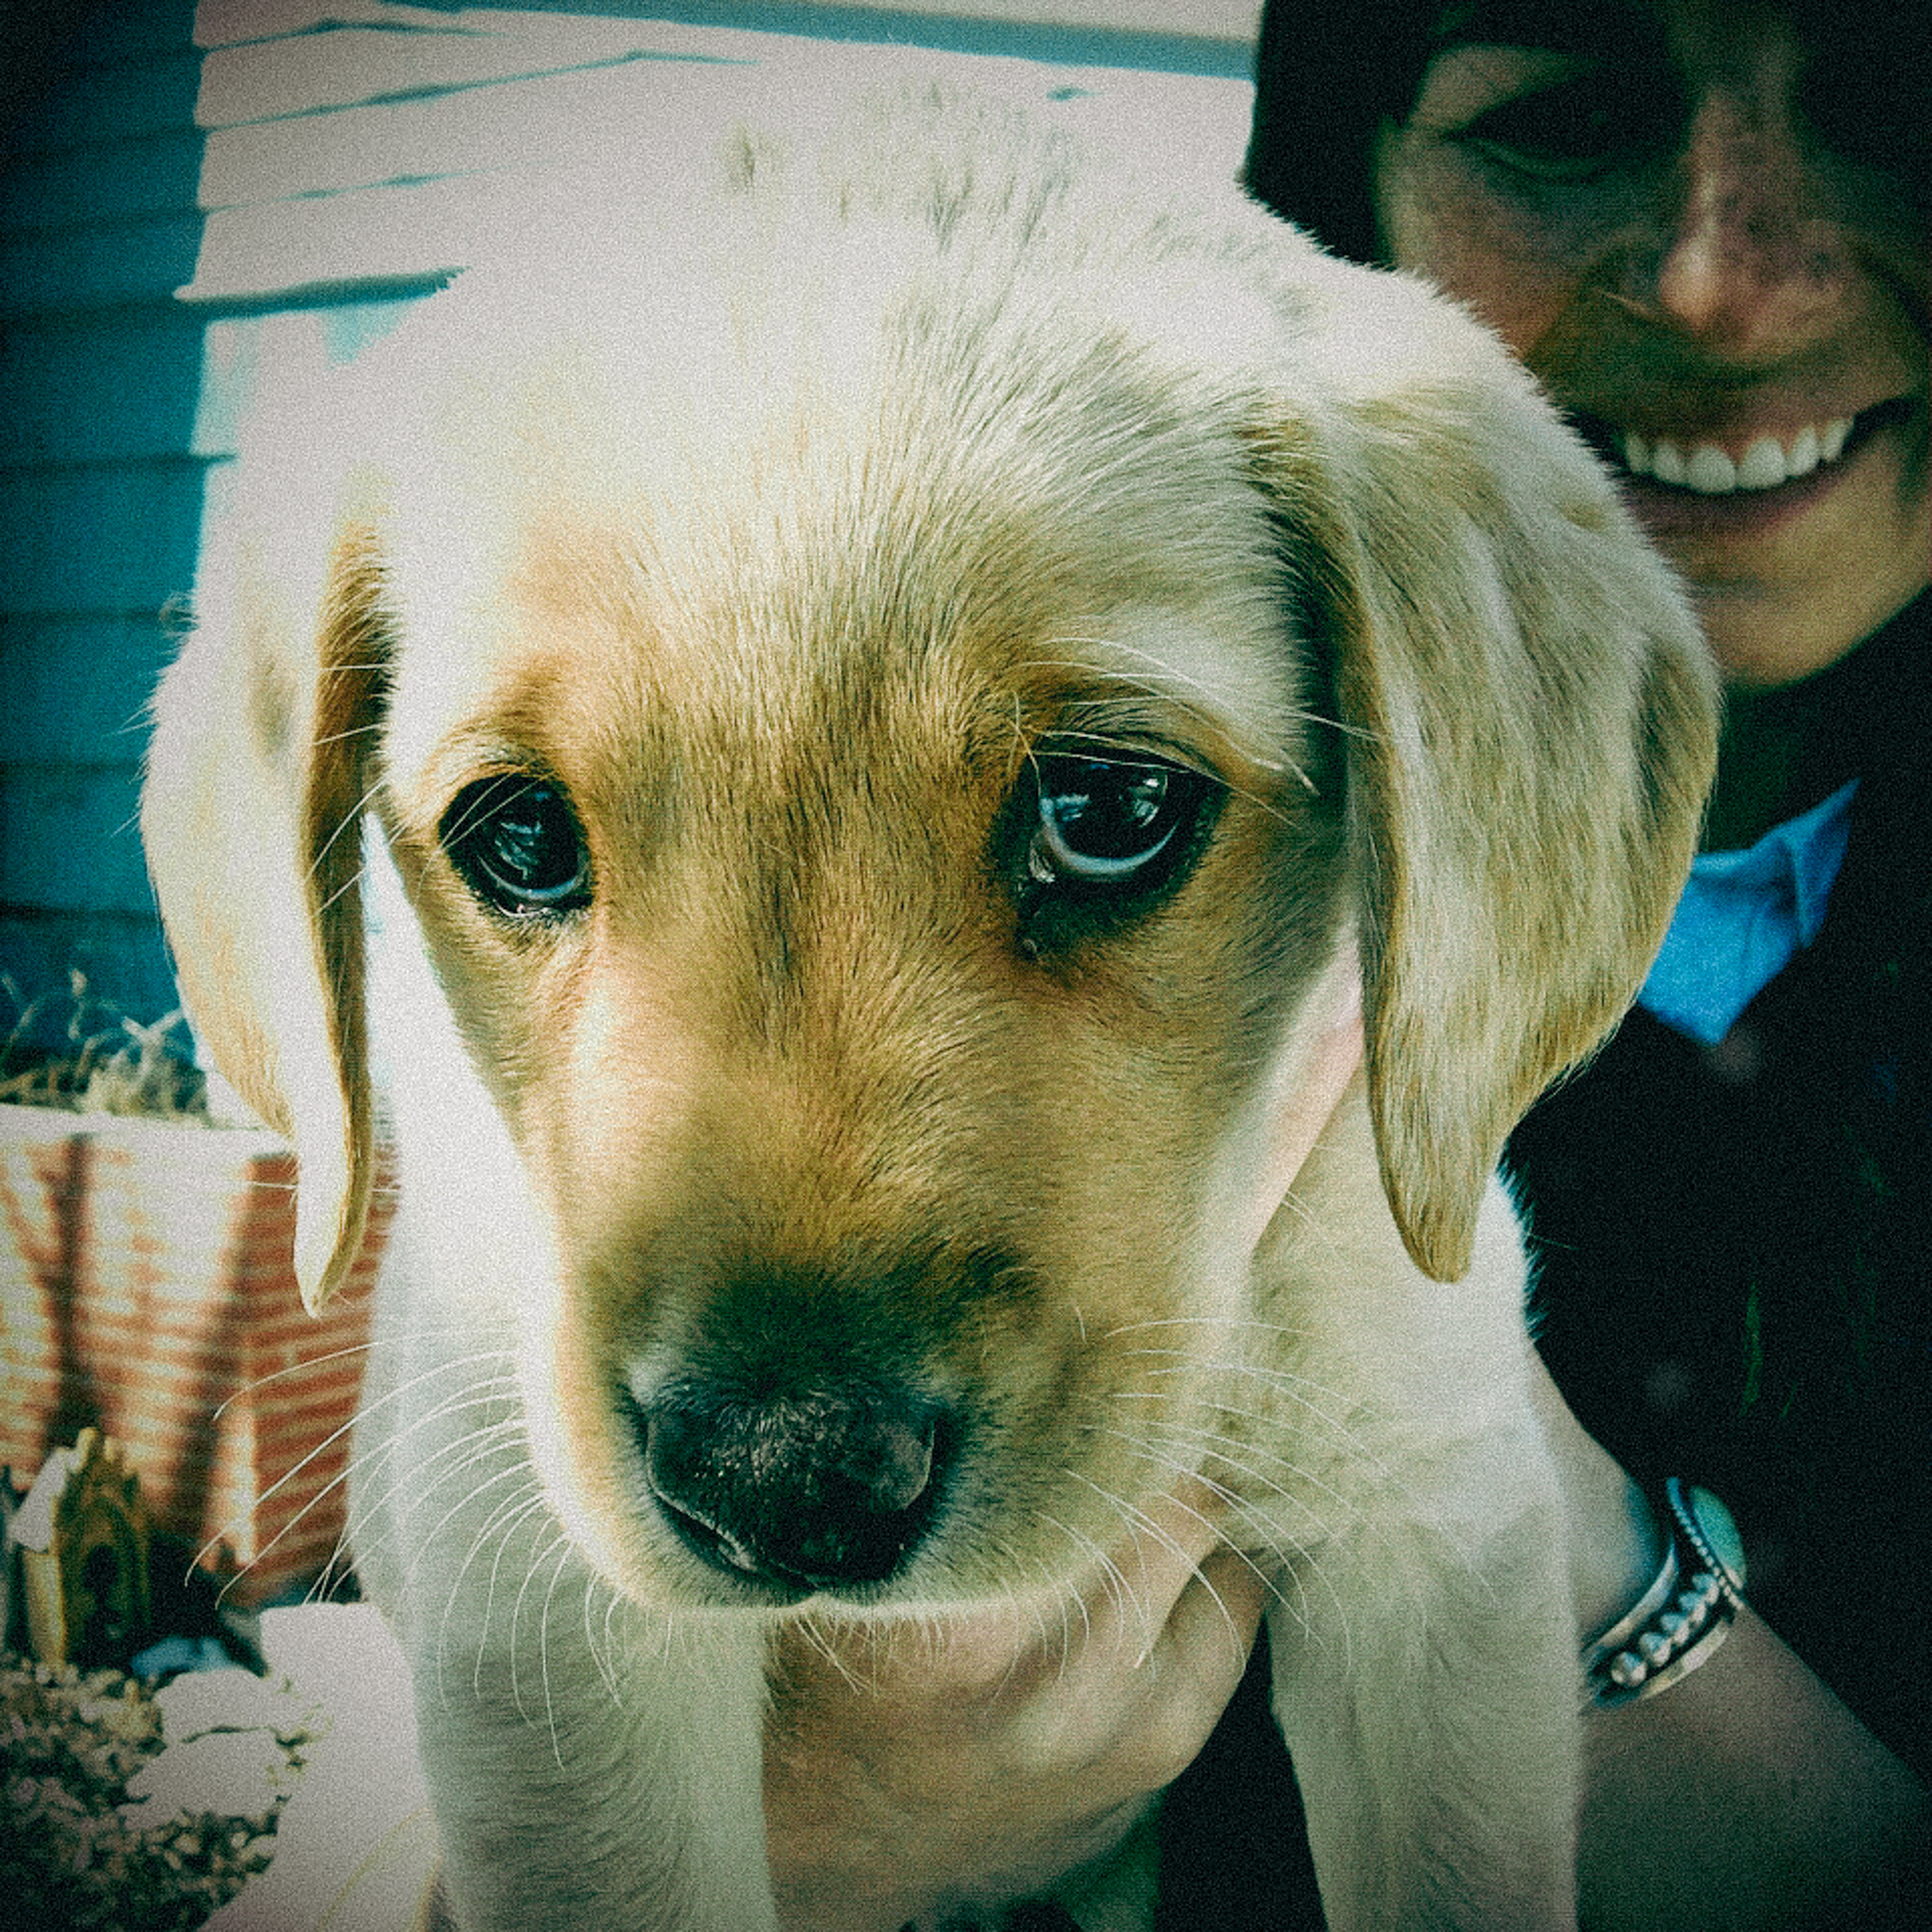 A woman holds a mischievous looking puppy.